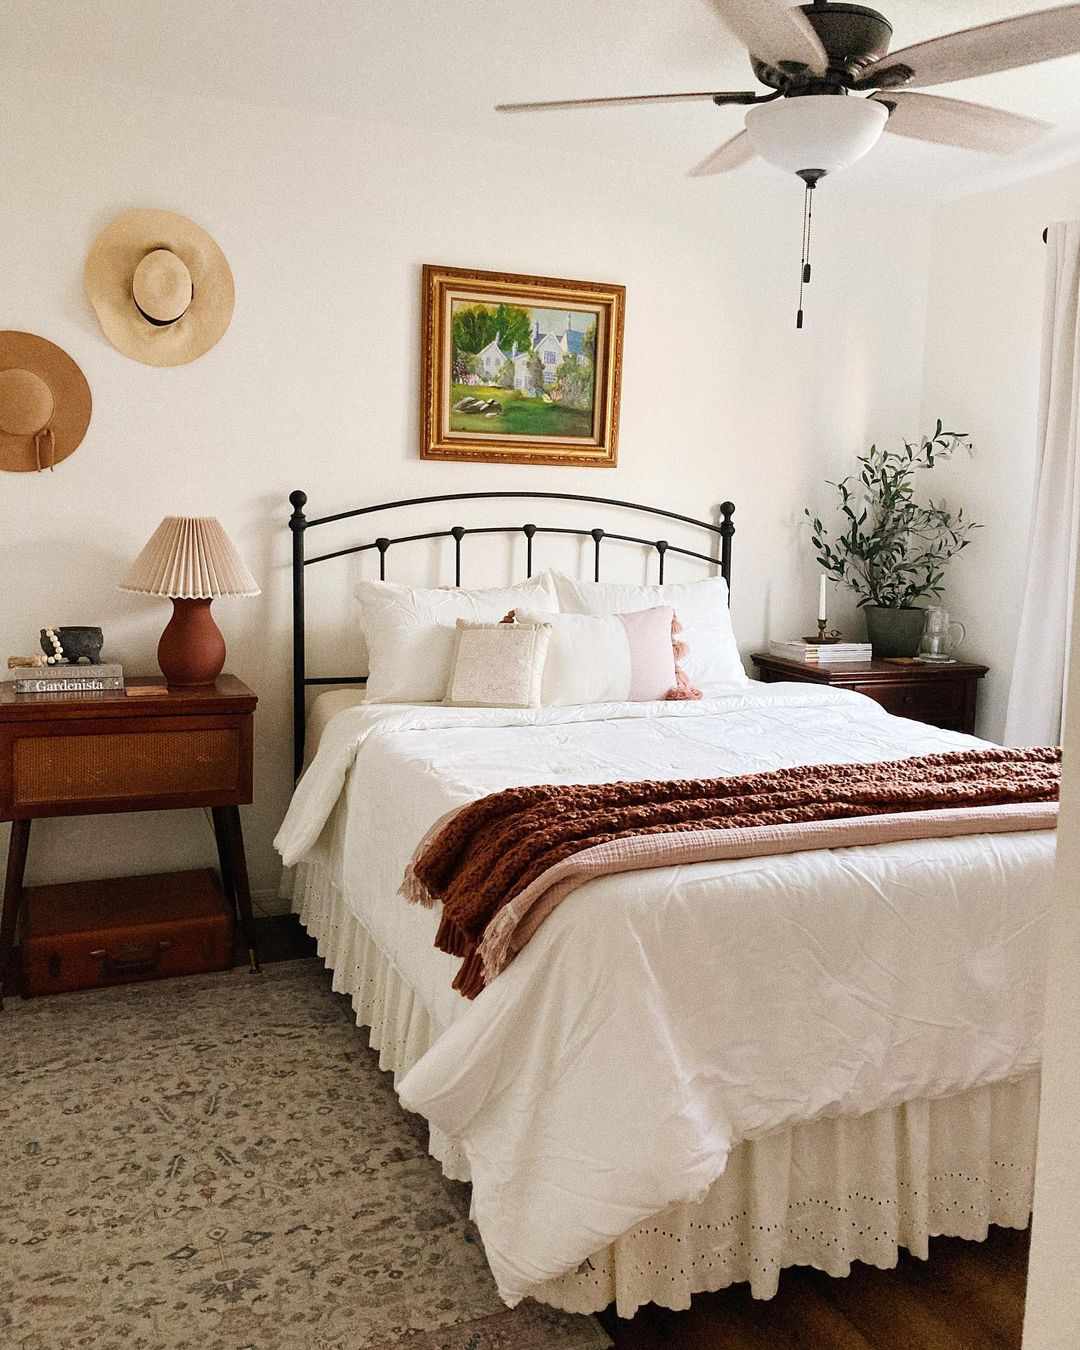 sunhat decor in guest room